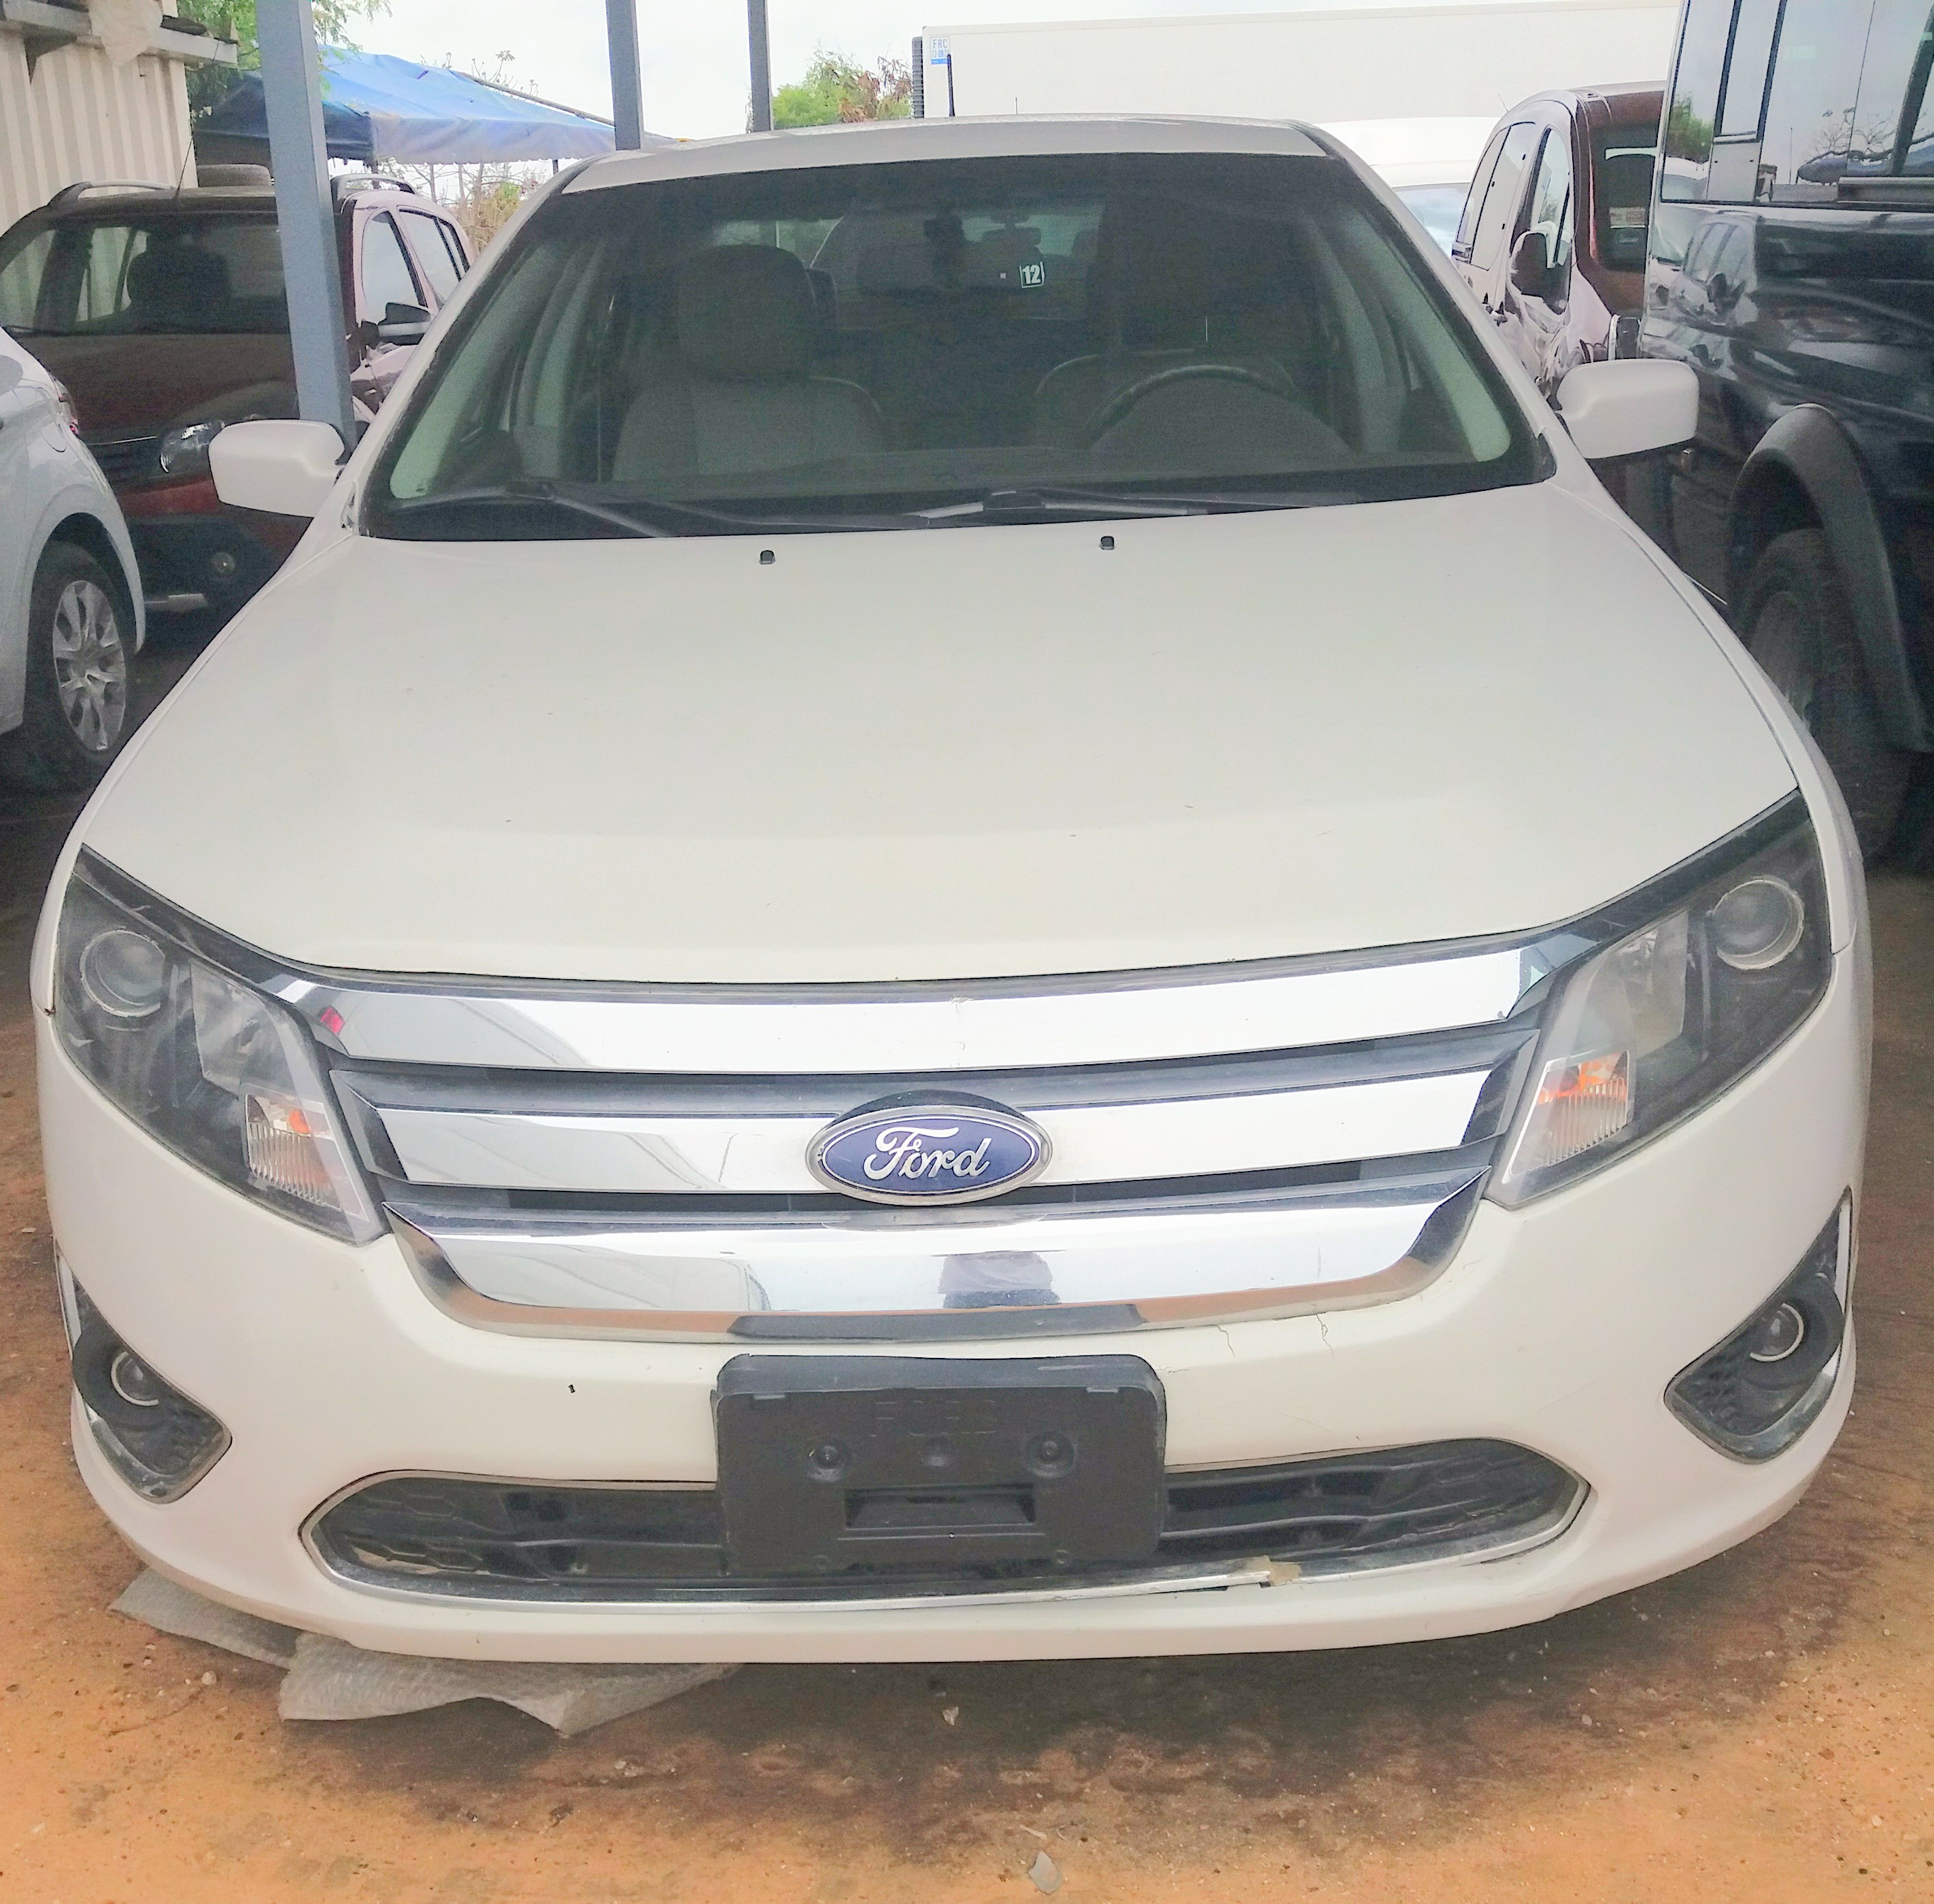 Ford Fusion 2012 5